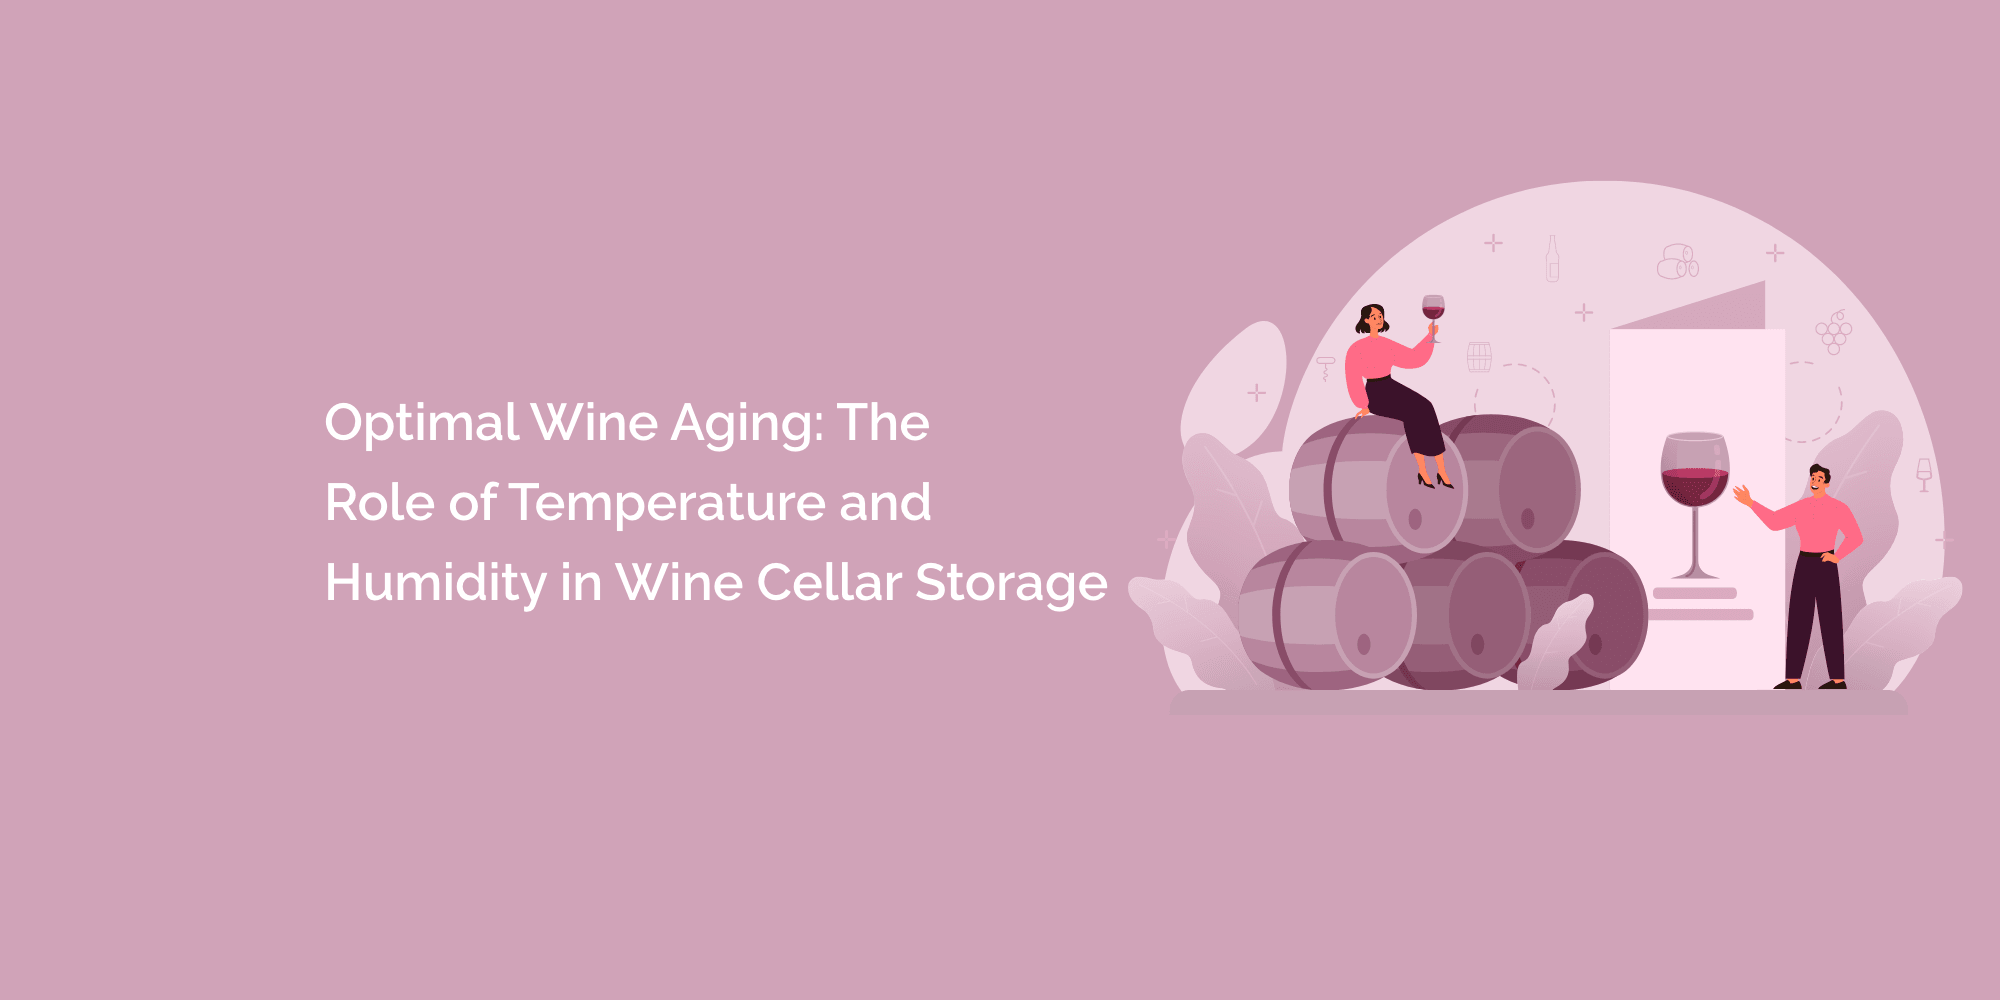 Optimal Wine Aging: The Role of Temperature and Humidity in Wine Cellar Storage